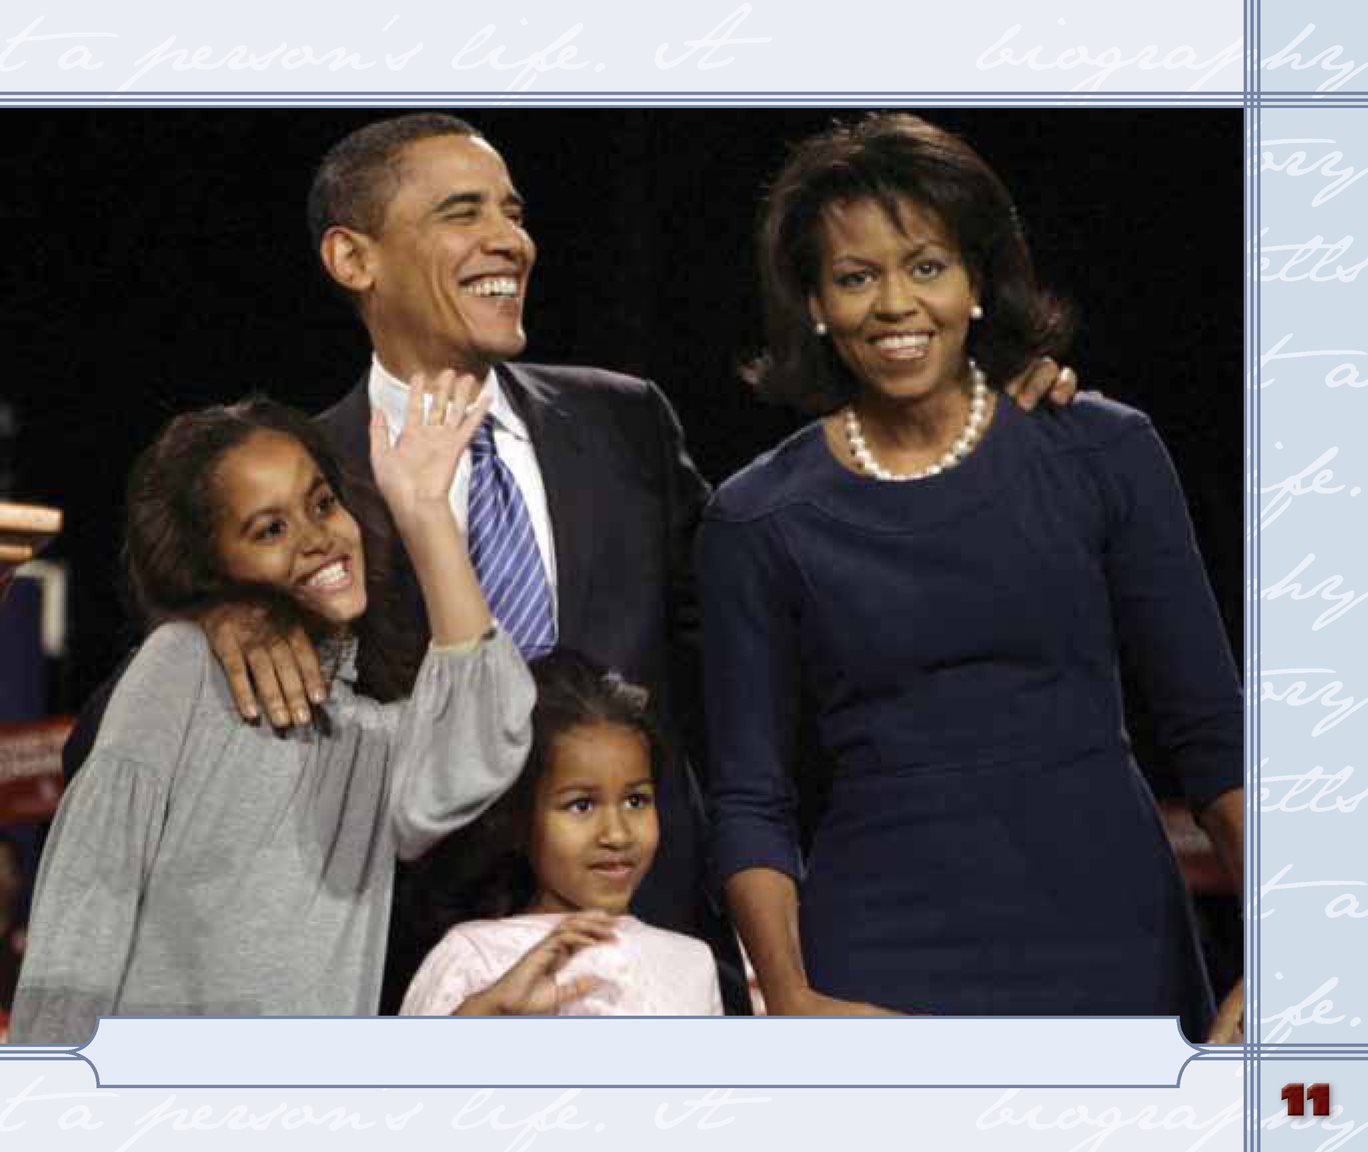 Barack and Michelle have two daughters Malia left and Sasha right - photo 13